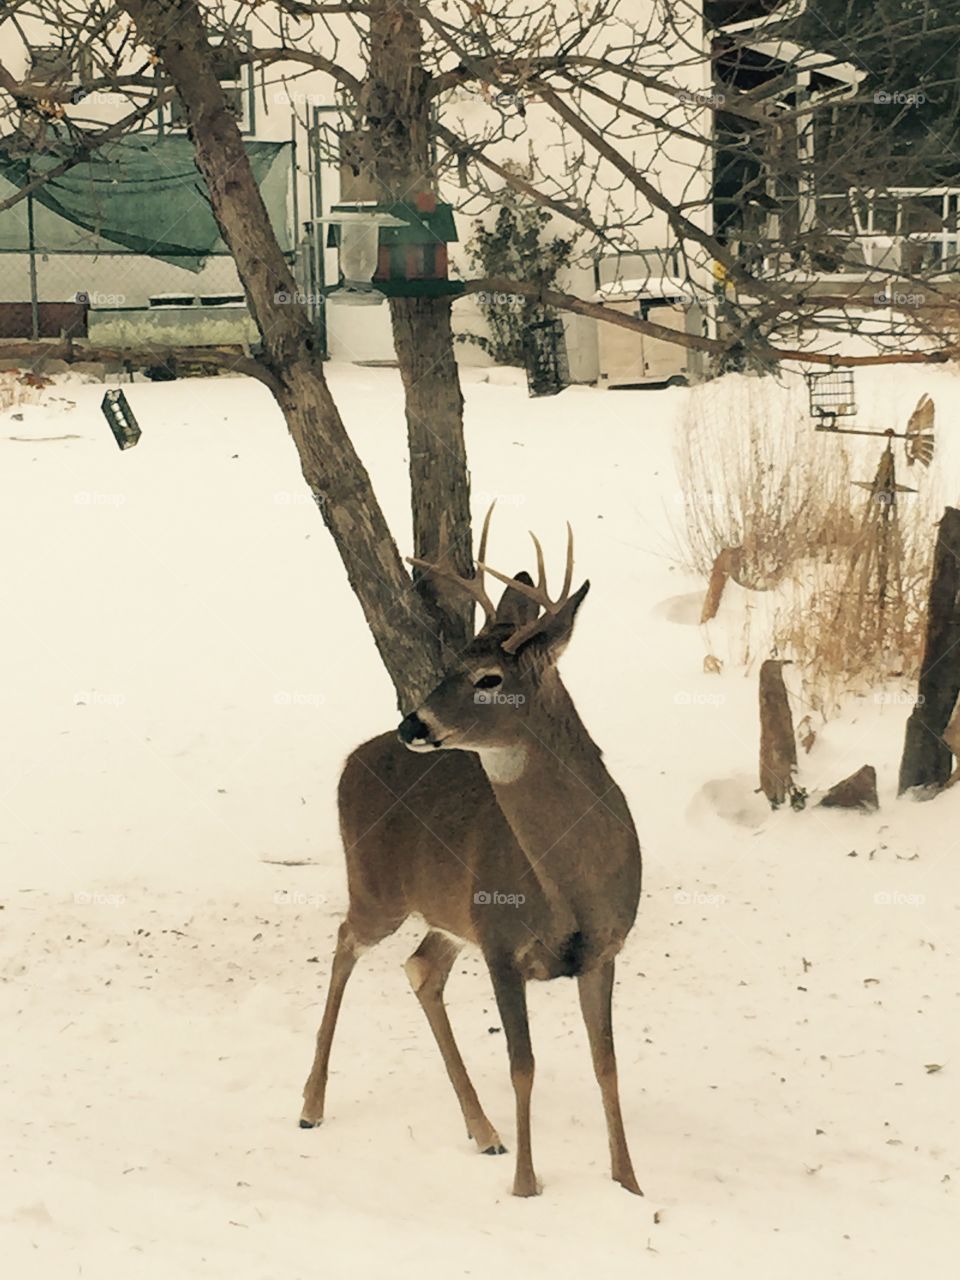 Just a Buck in the yard